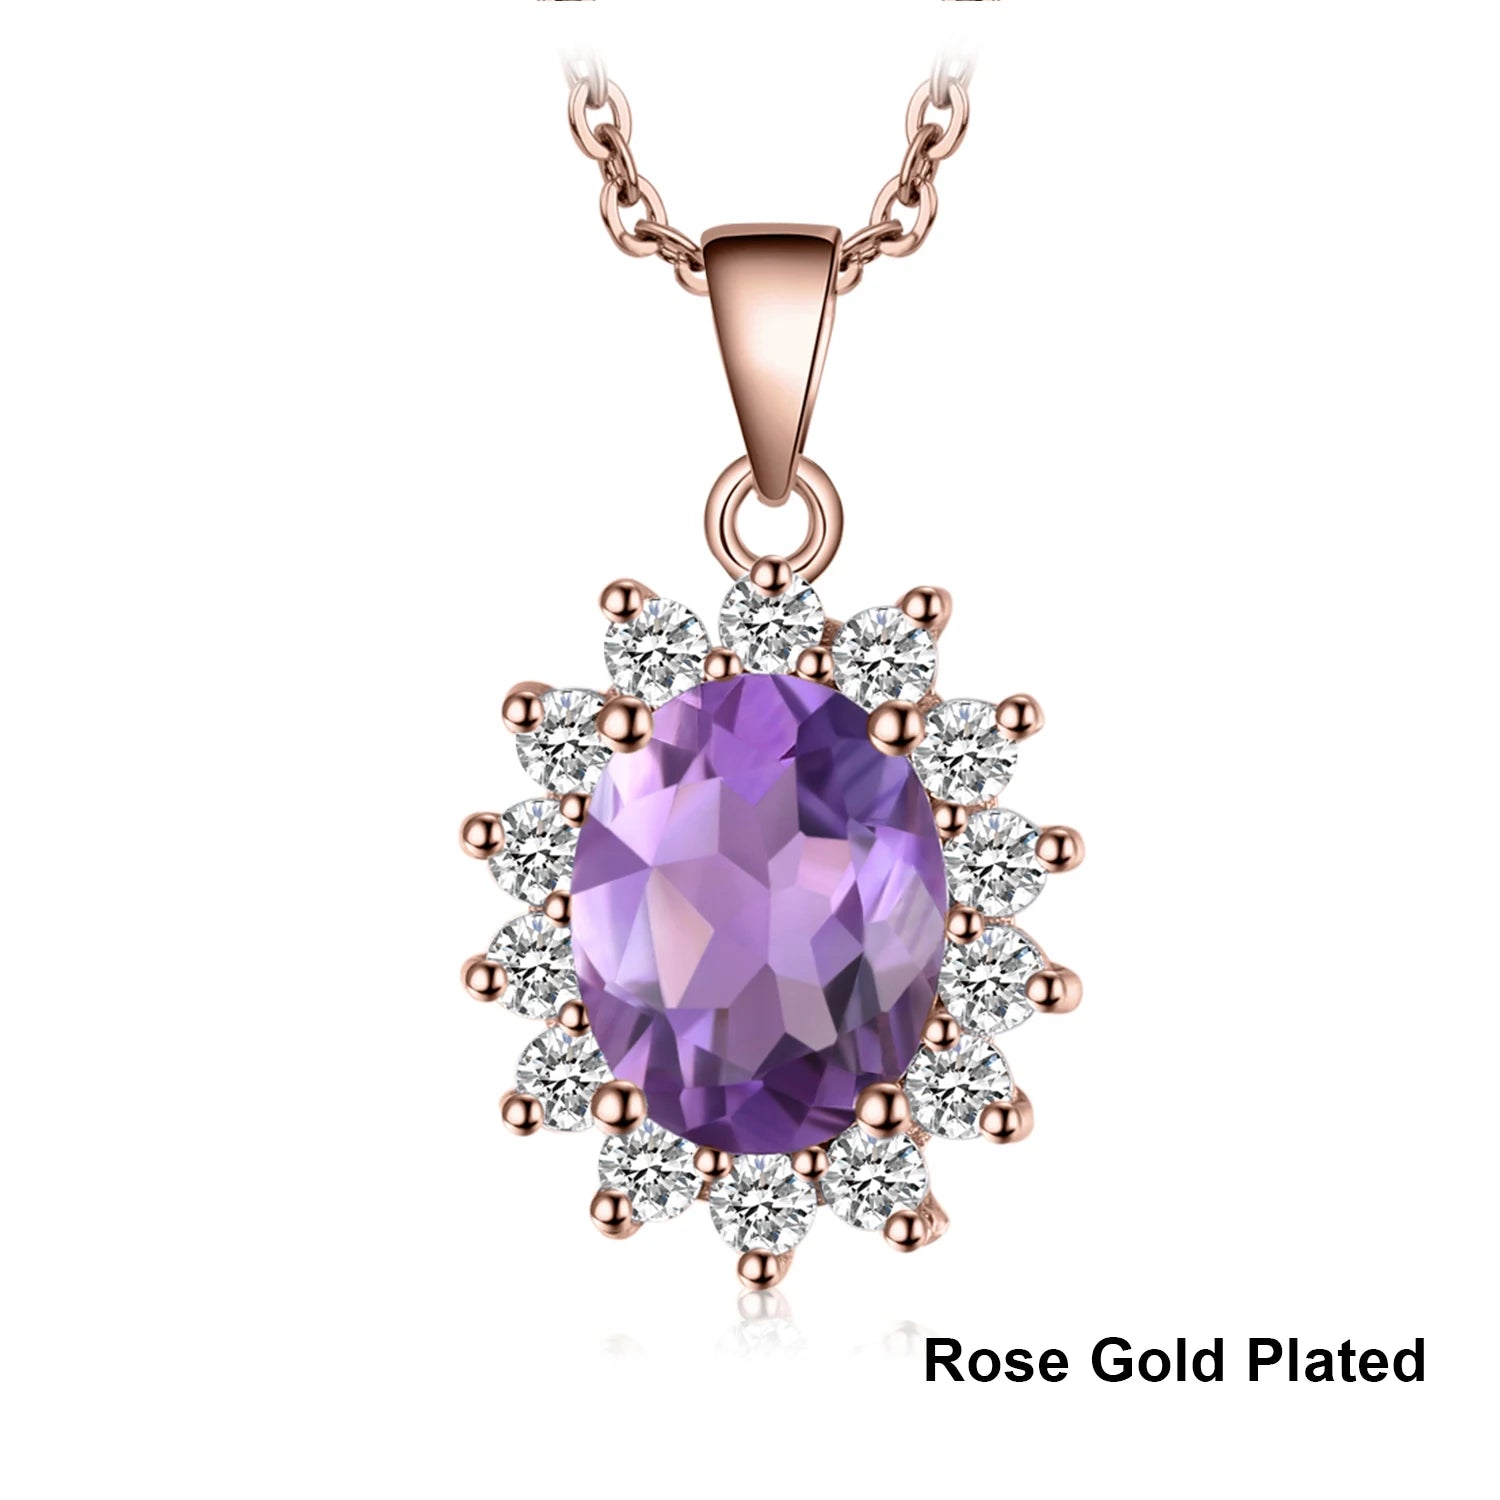 Jewelrypalace Created Alexandrite Natural Amethyst Garnet 925 Sterling Silver Pendant Necklace No Chain Yellow Rose Gold Plated Natural Amethyst 1